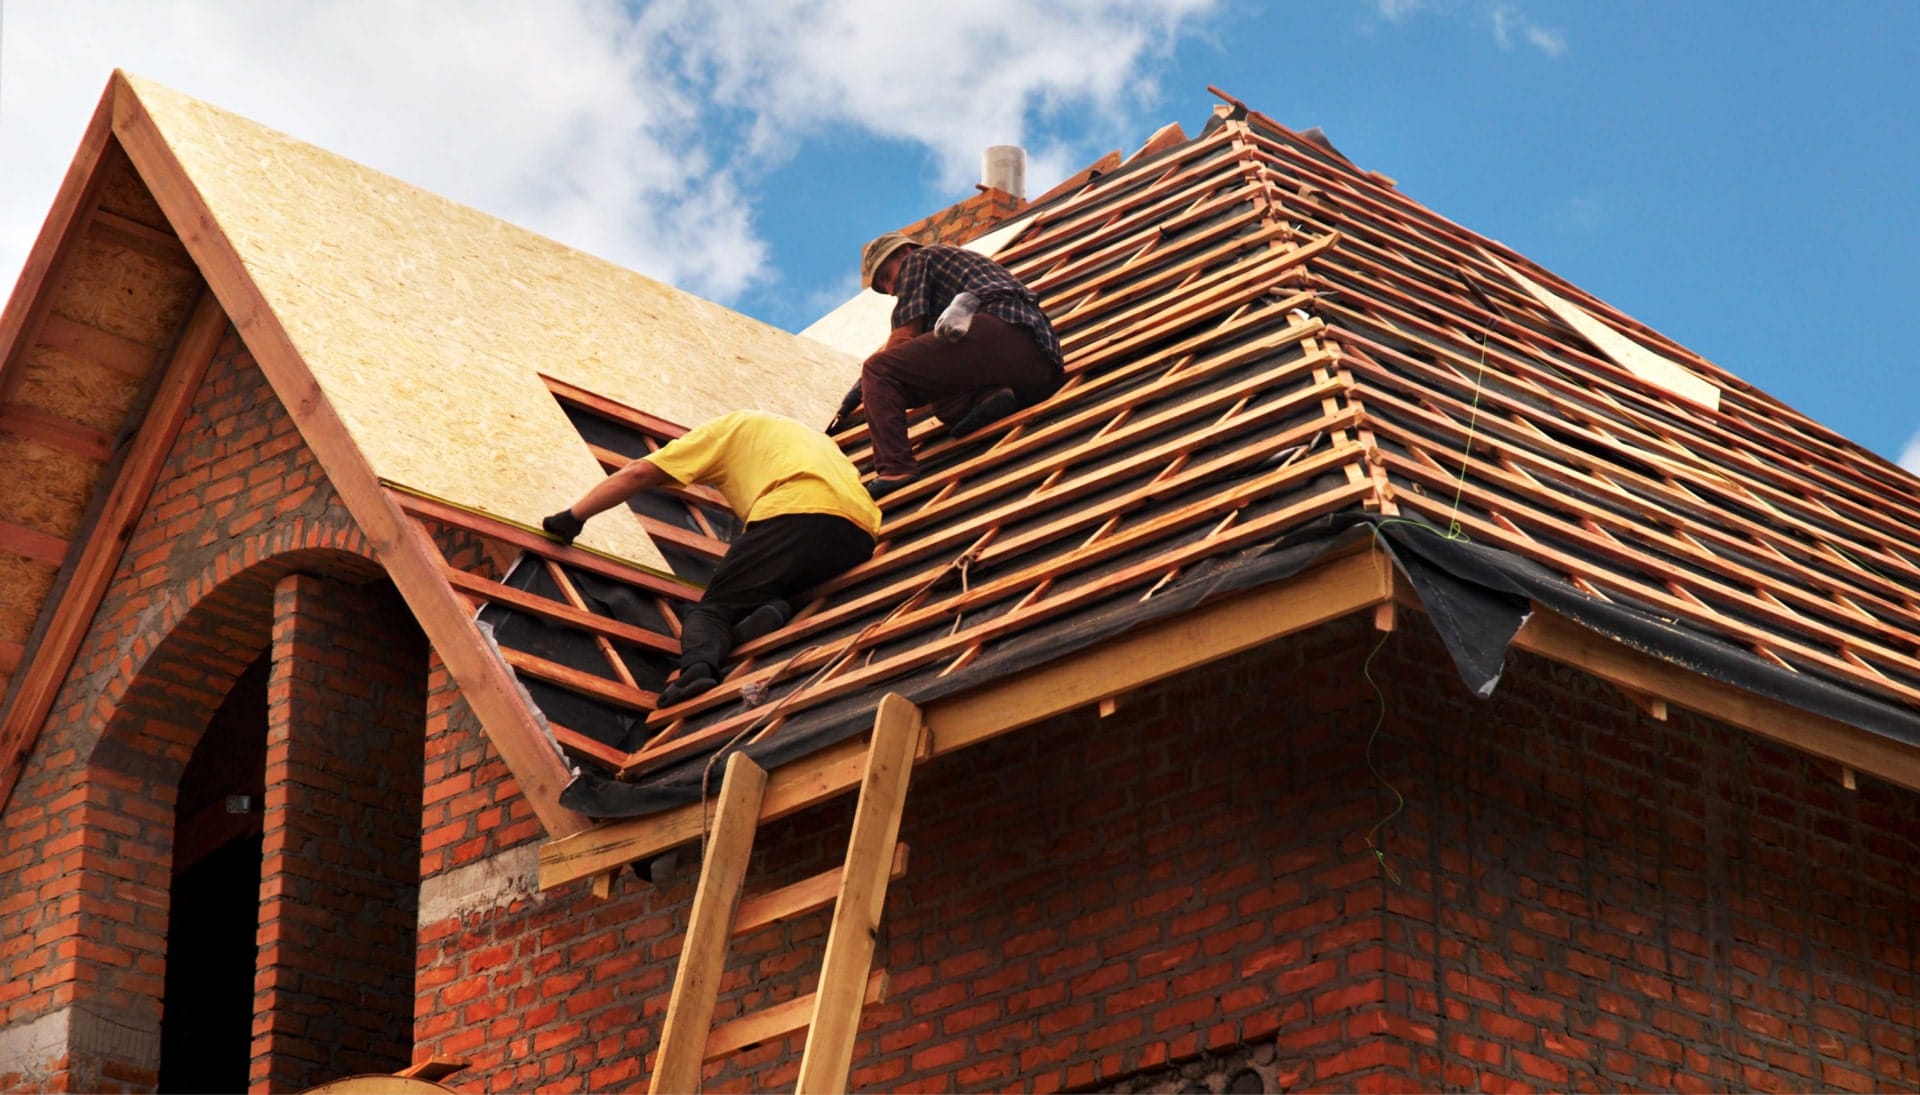 Trustworthy professional roofing services in Columbia, Maryland with years of industry expertise.